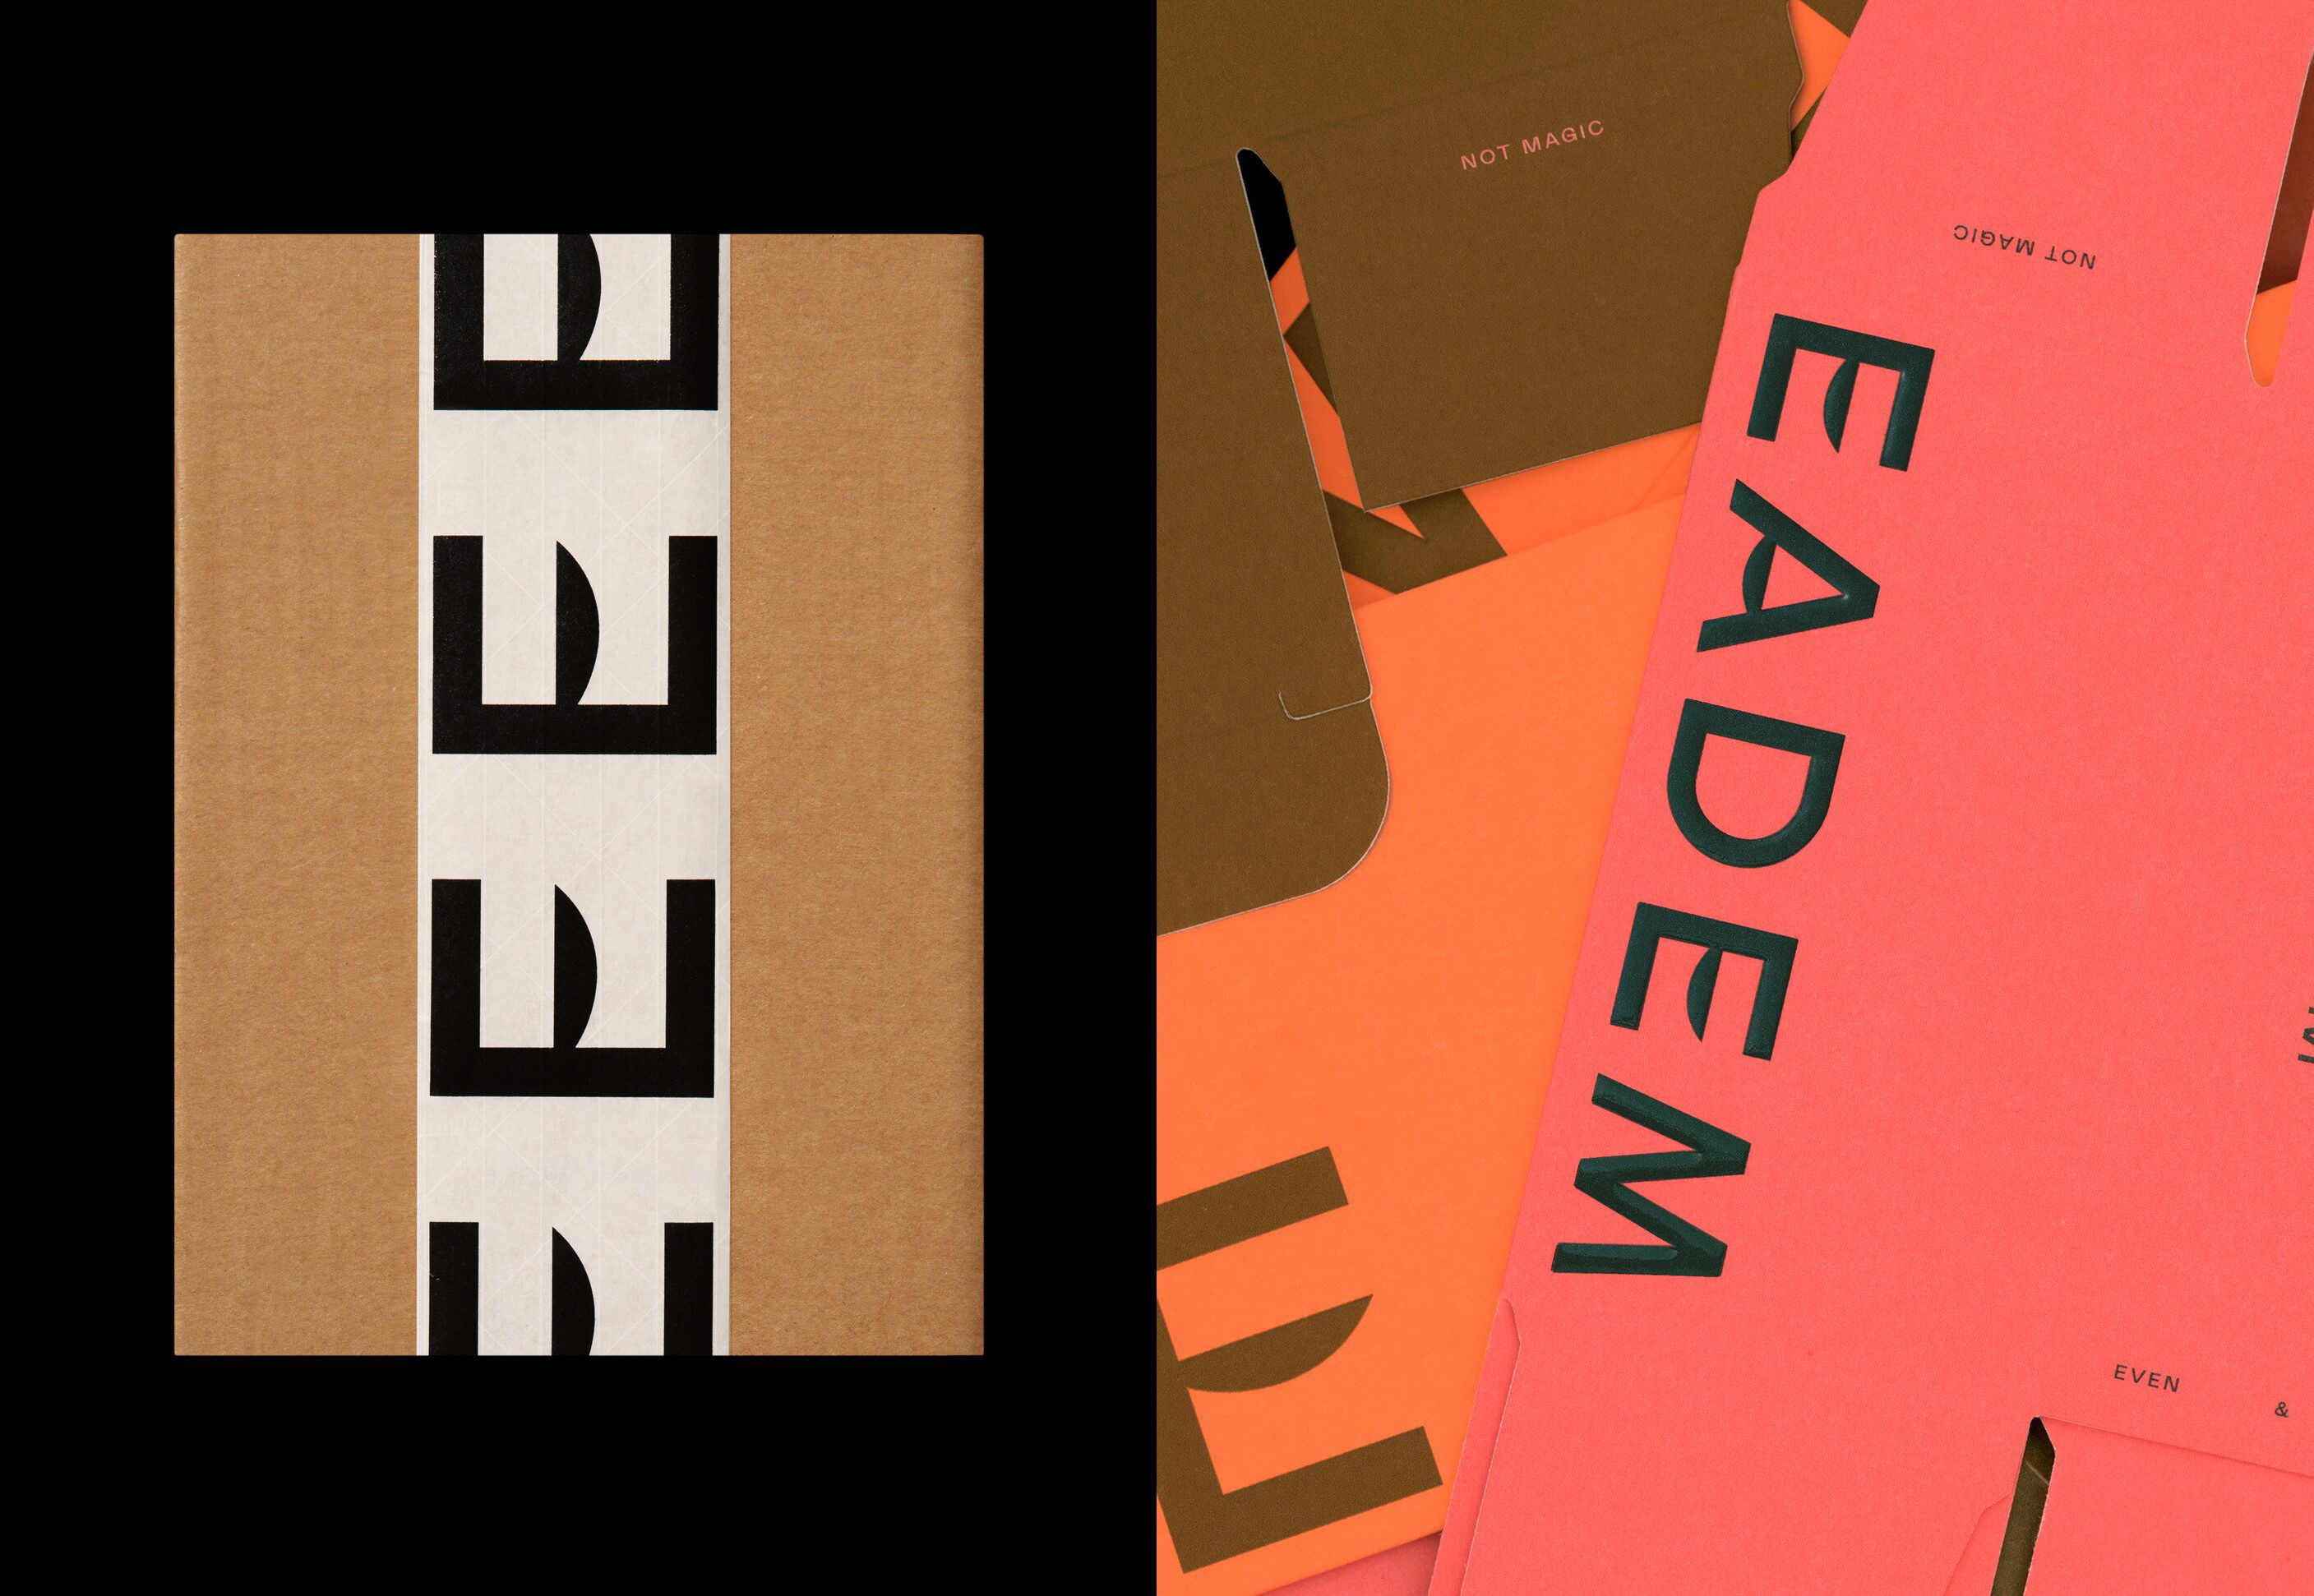 Eadem – Beauty brand for people of colour. Packaging design by New York and Parisian based Lotta Nieminen. Reviewed by Kinda Sararino for BP&O